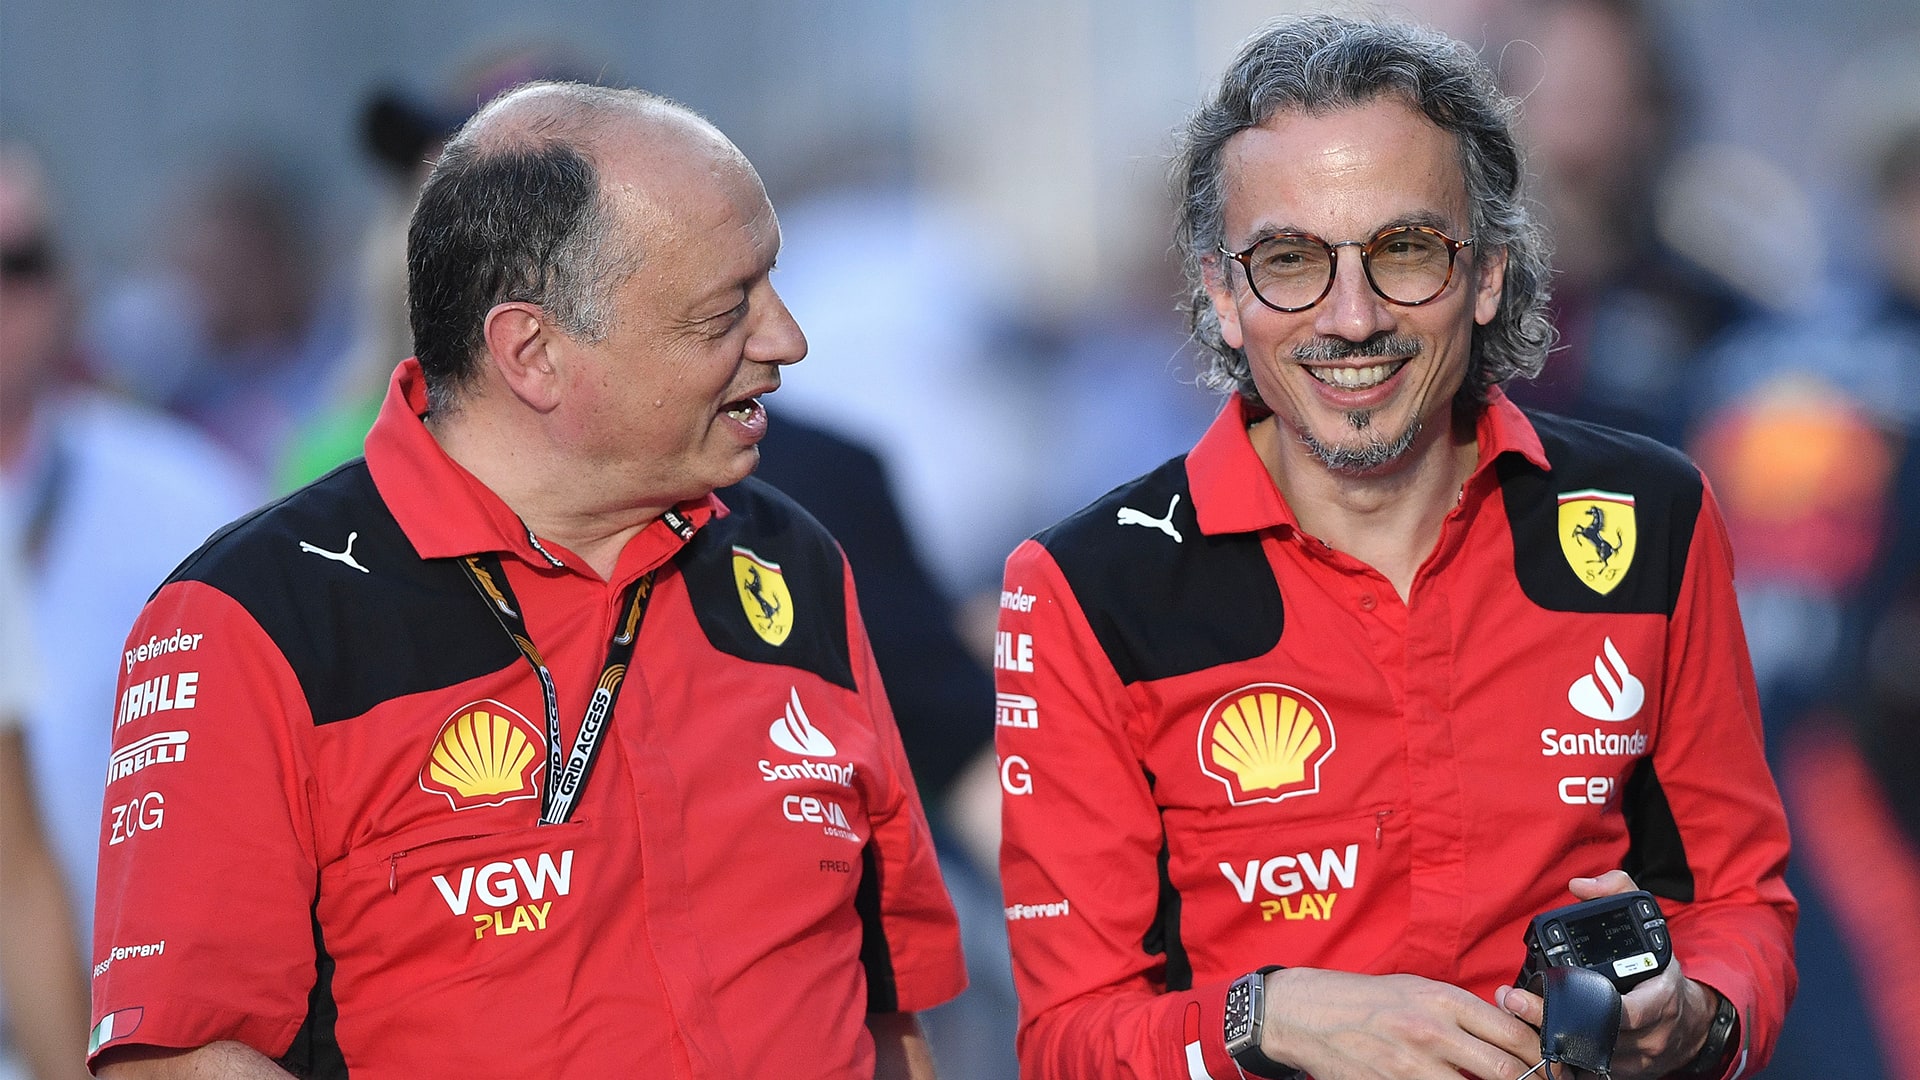 Vasseur concedes Mekies' upcoming move to AlphaTauri was 'difficult to  refuse' after 'open discussion' | Formula 1®